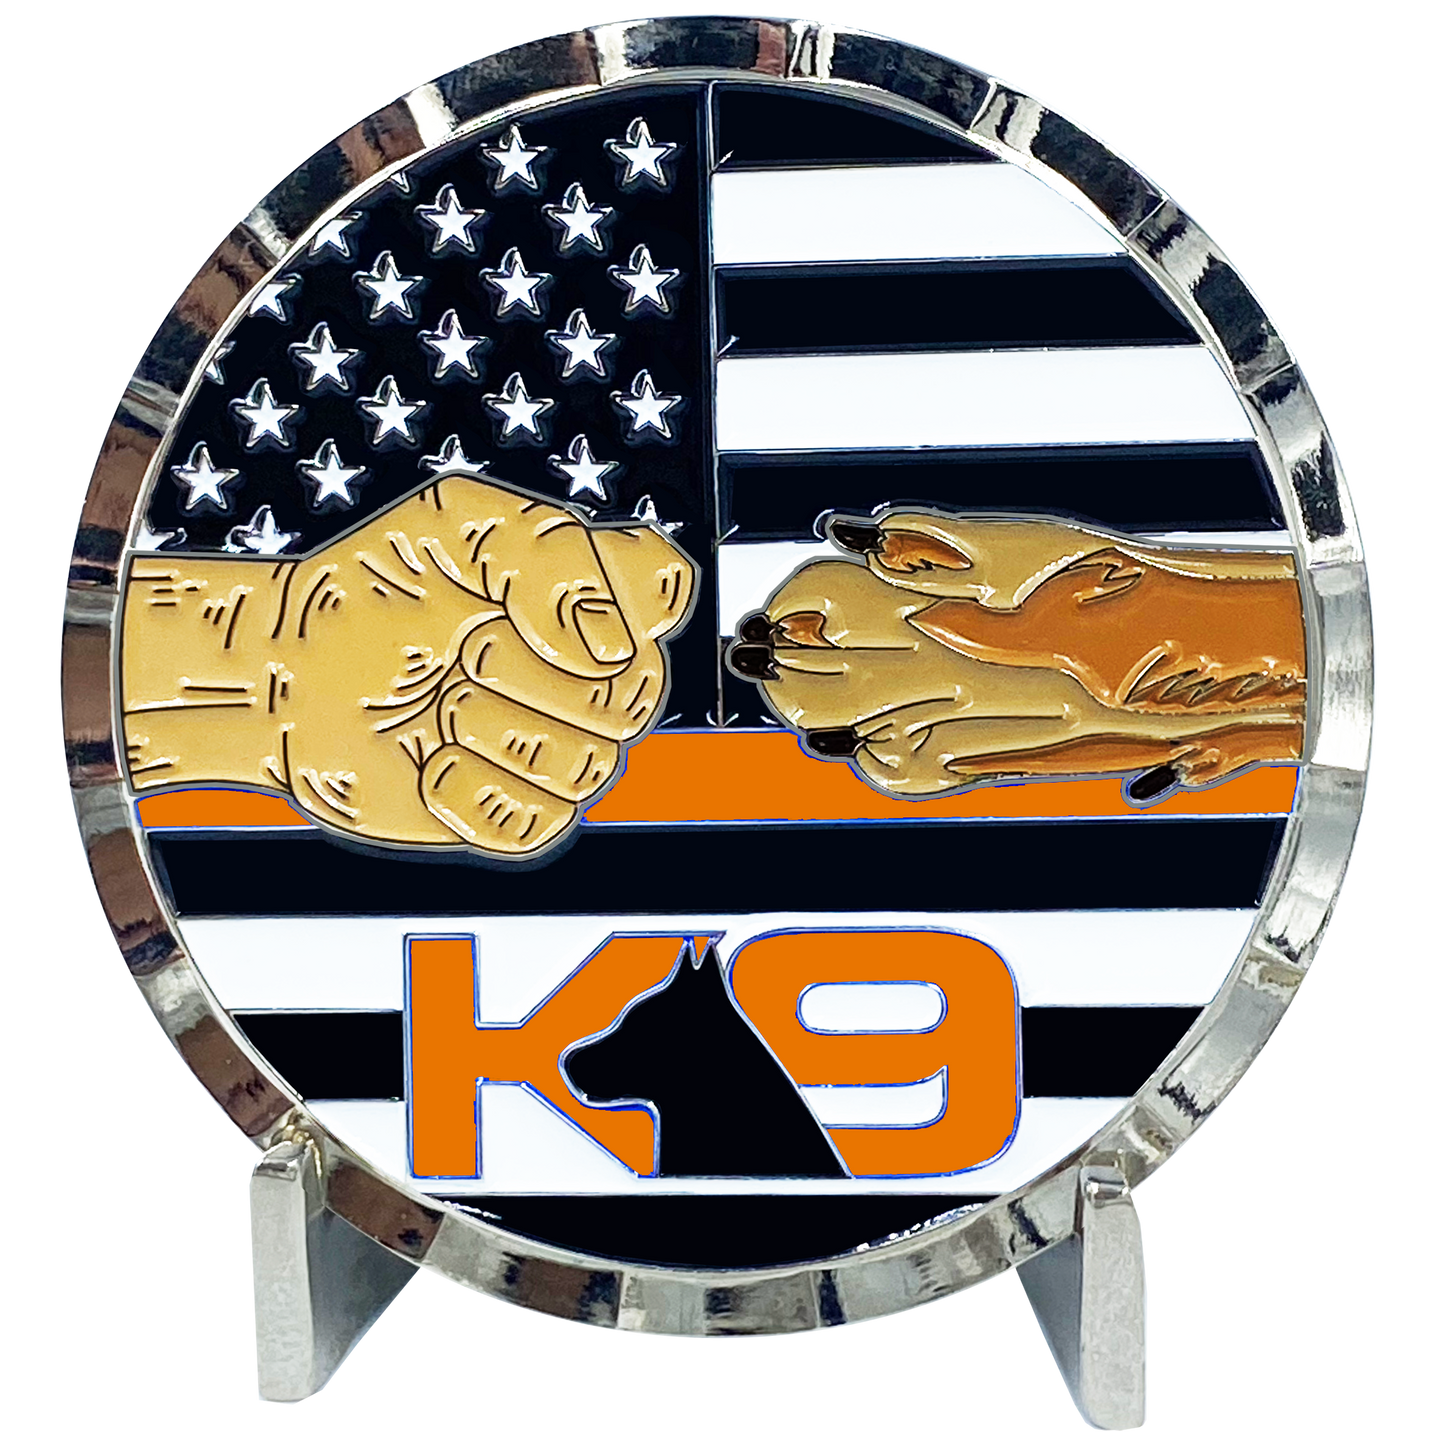 BL7-007 Thin Orange Line Search and Rescue Challenge Coin Fist Paw Bump Police Fire Department Military